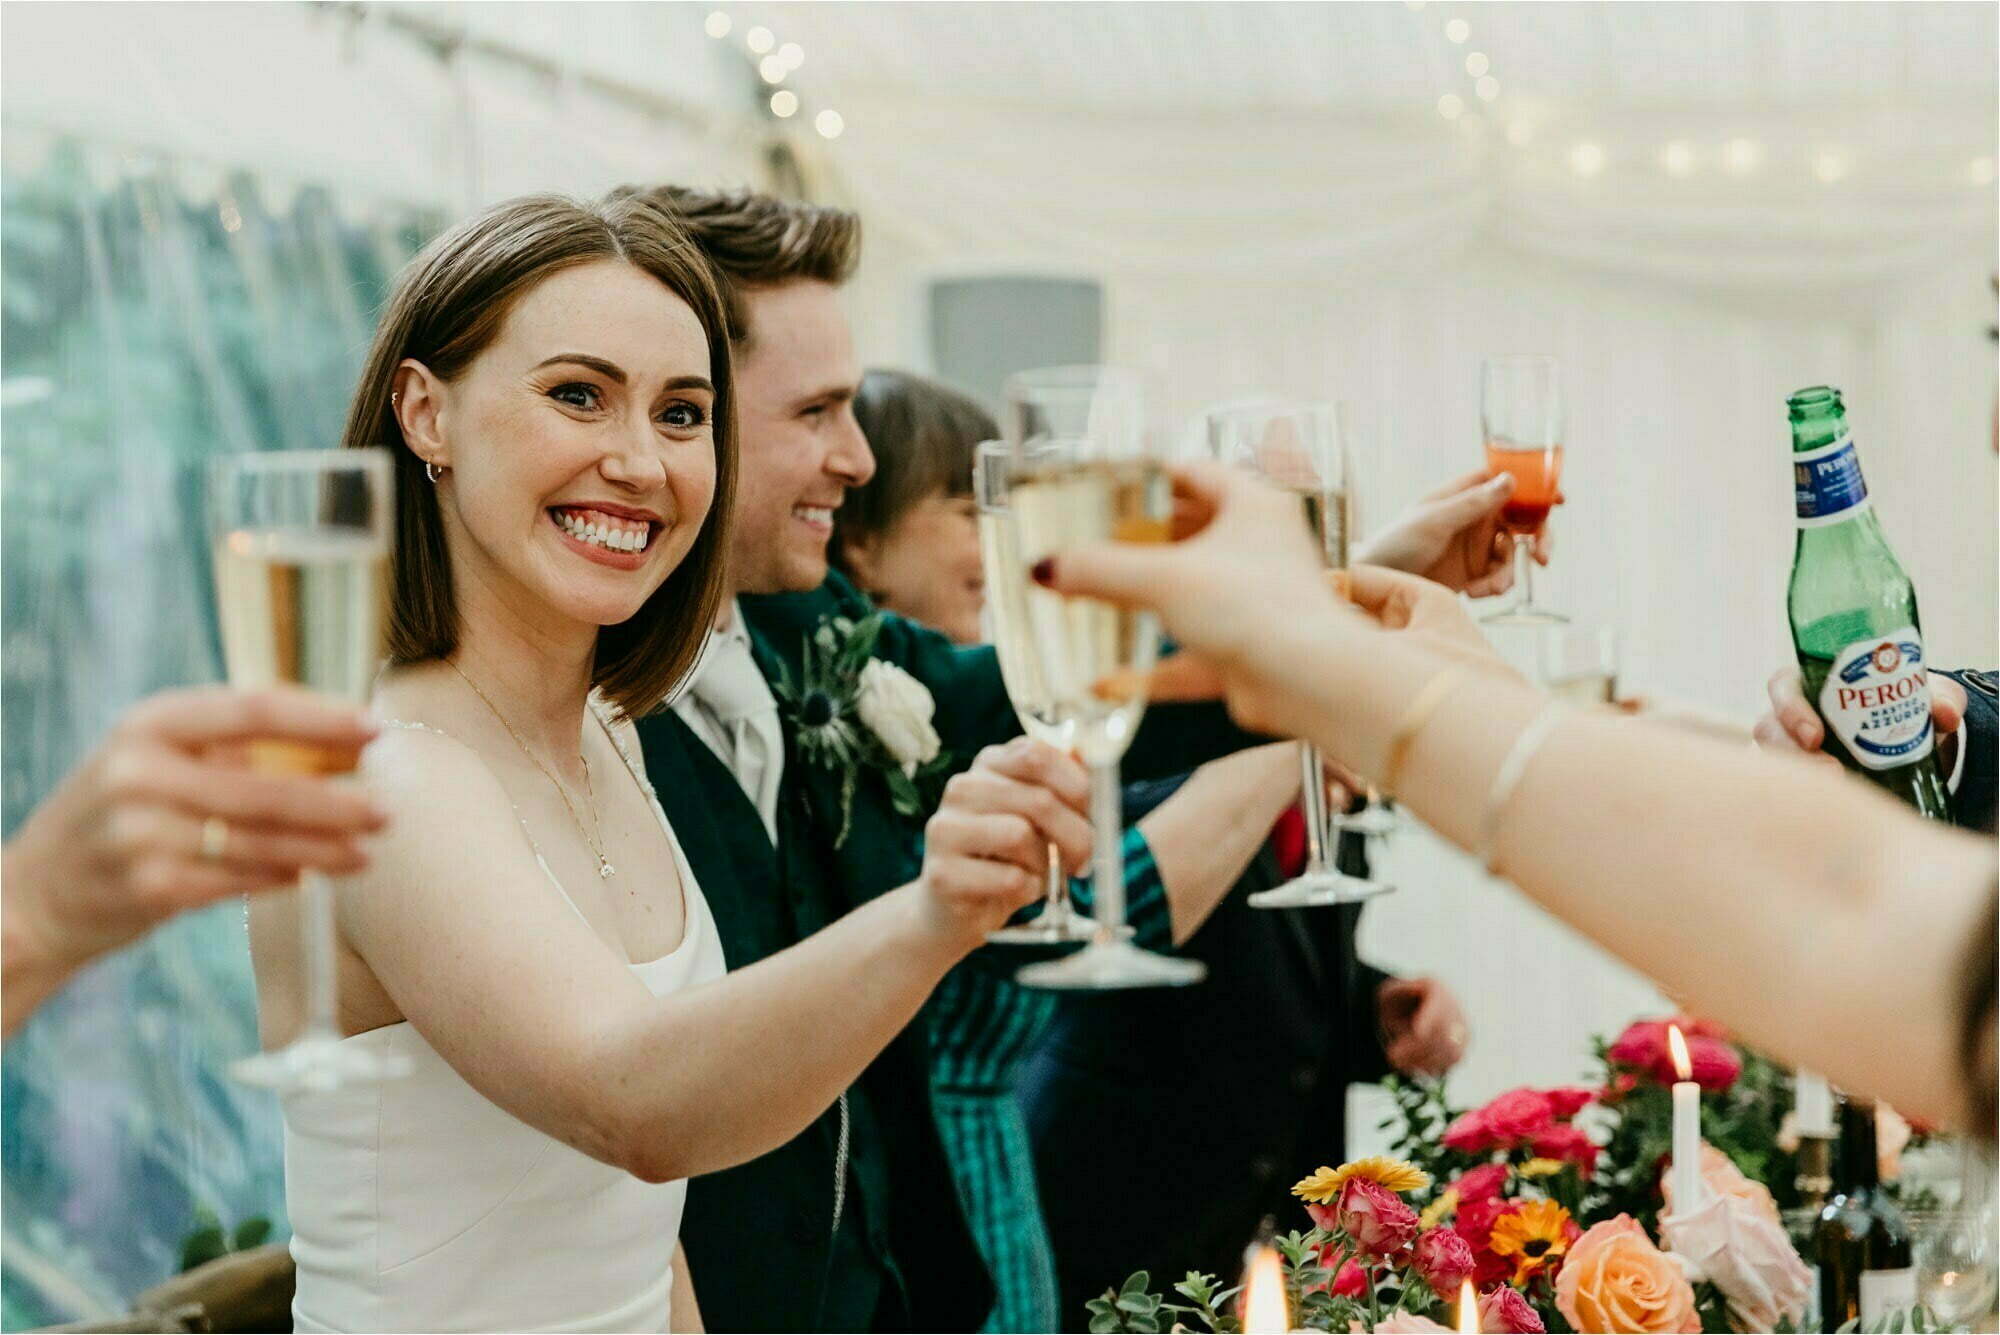 micro wedding at home back garden glasgow bride groom in mini marquee speeches